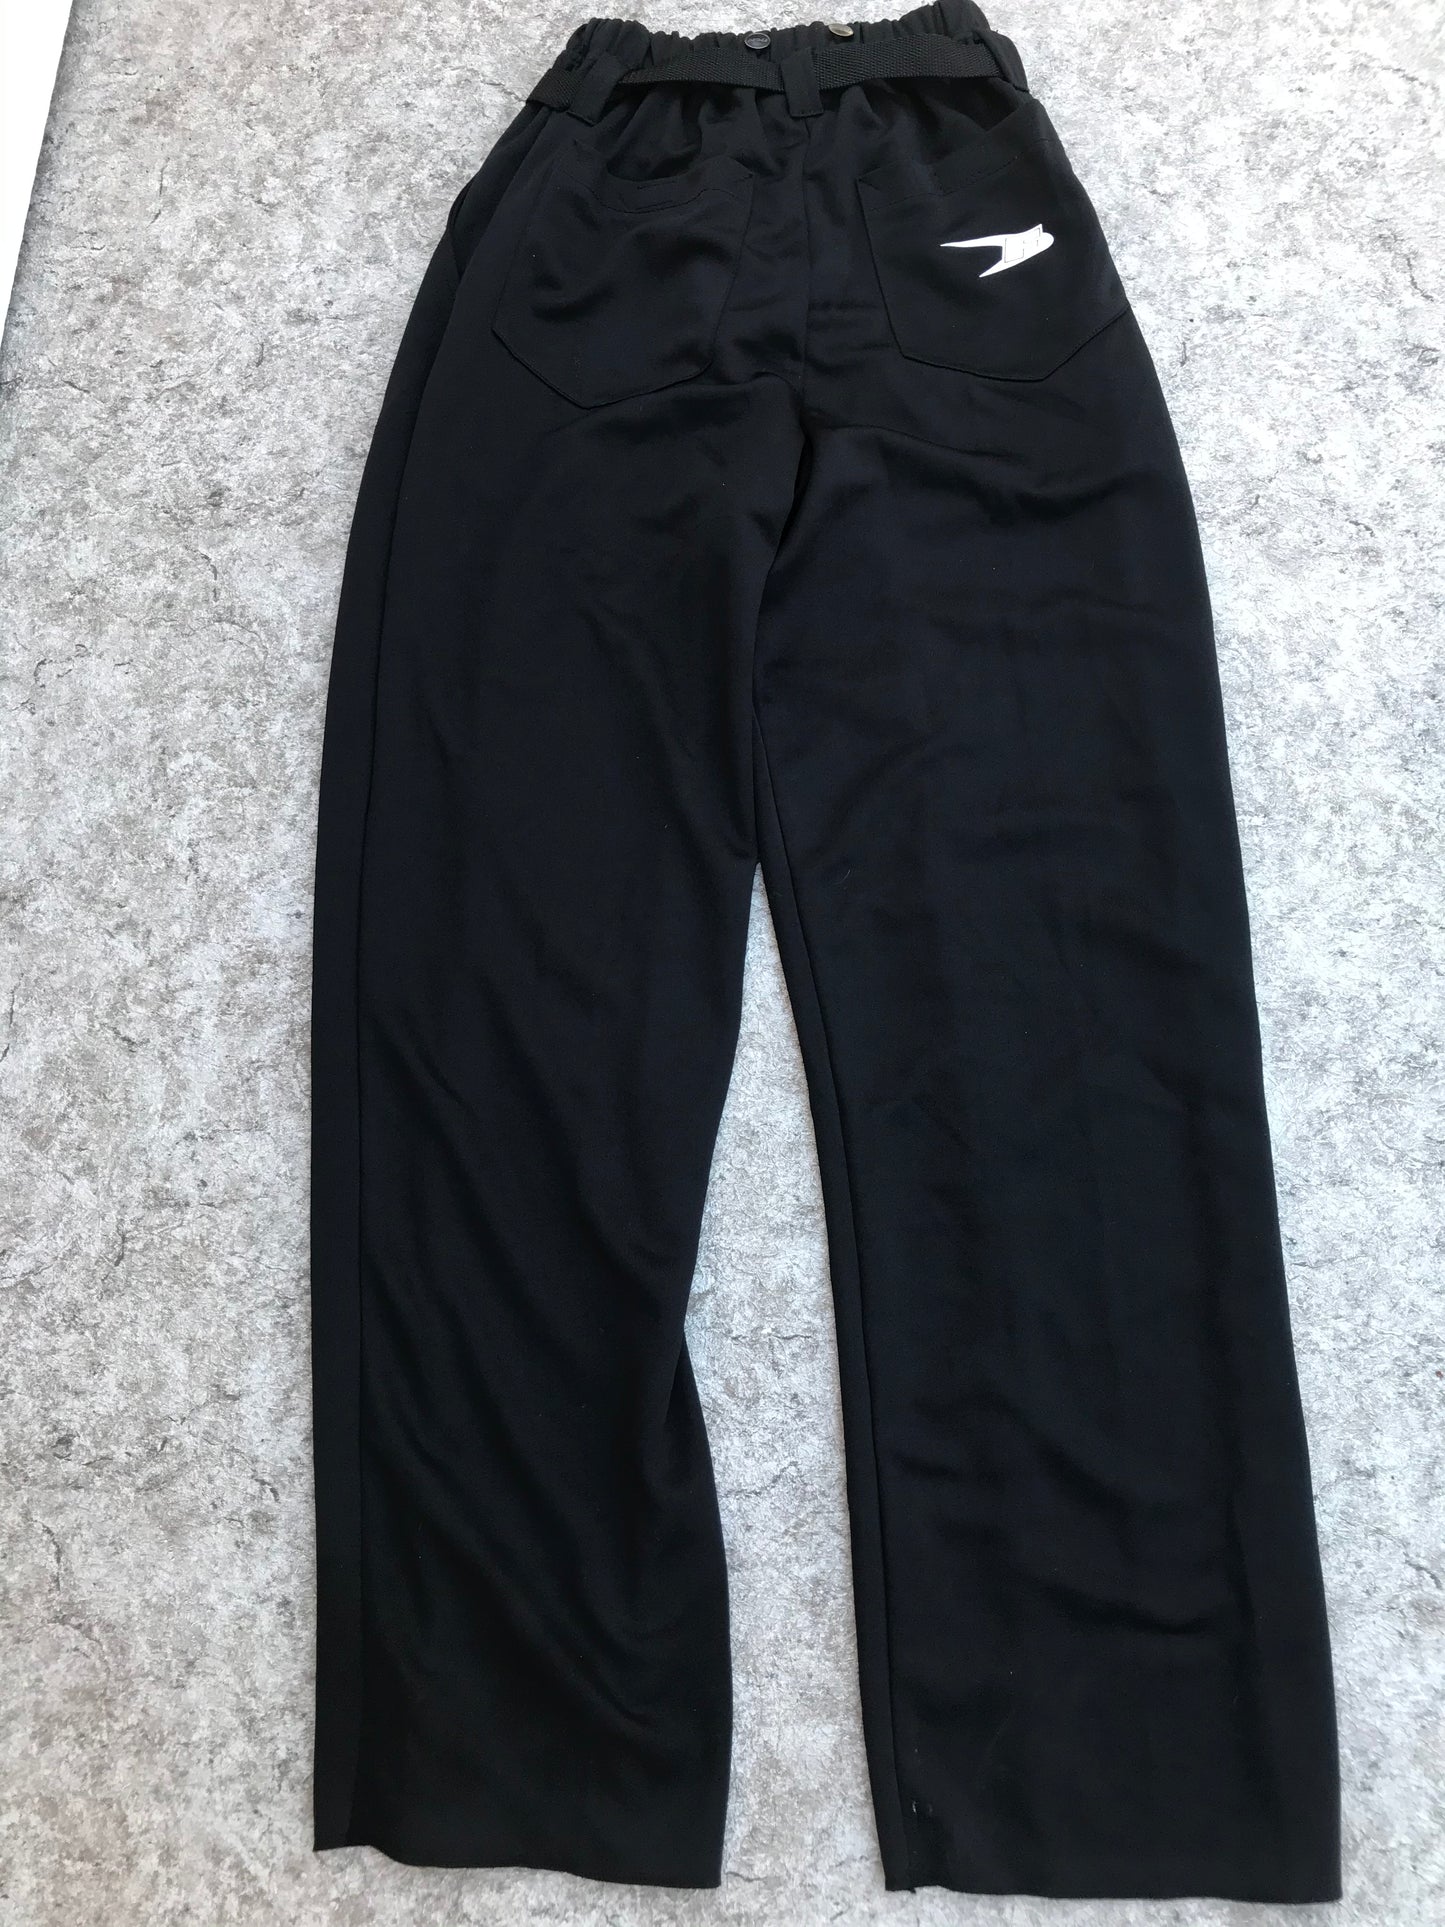 Hockey Referee Pants Men's Size Small New With Tag Front Waist Snap Broken